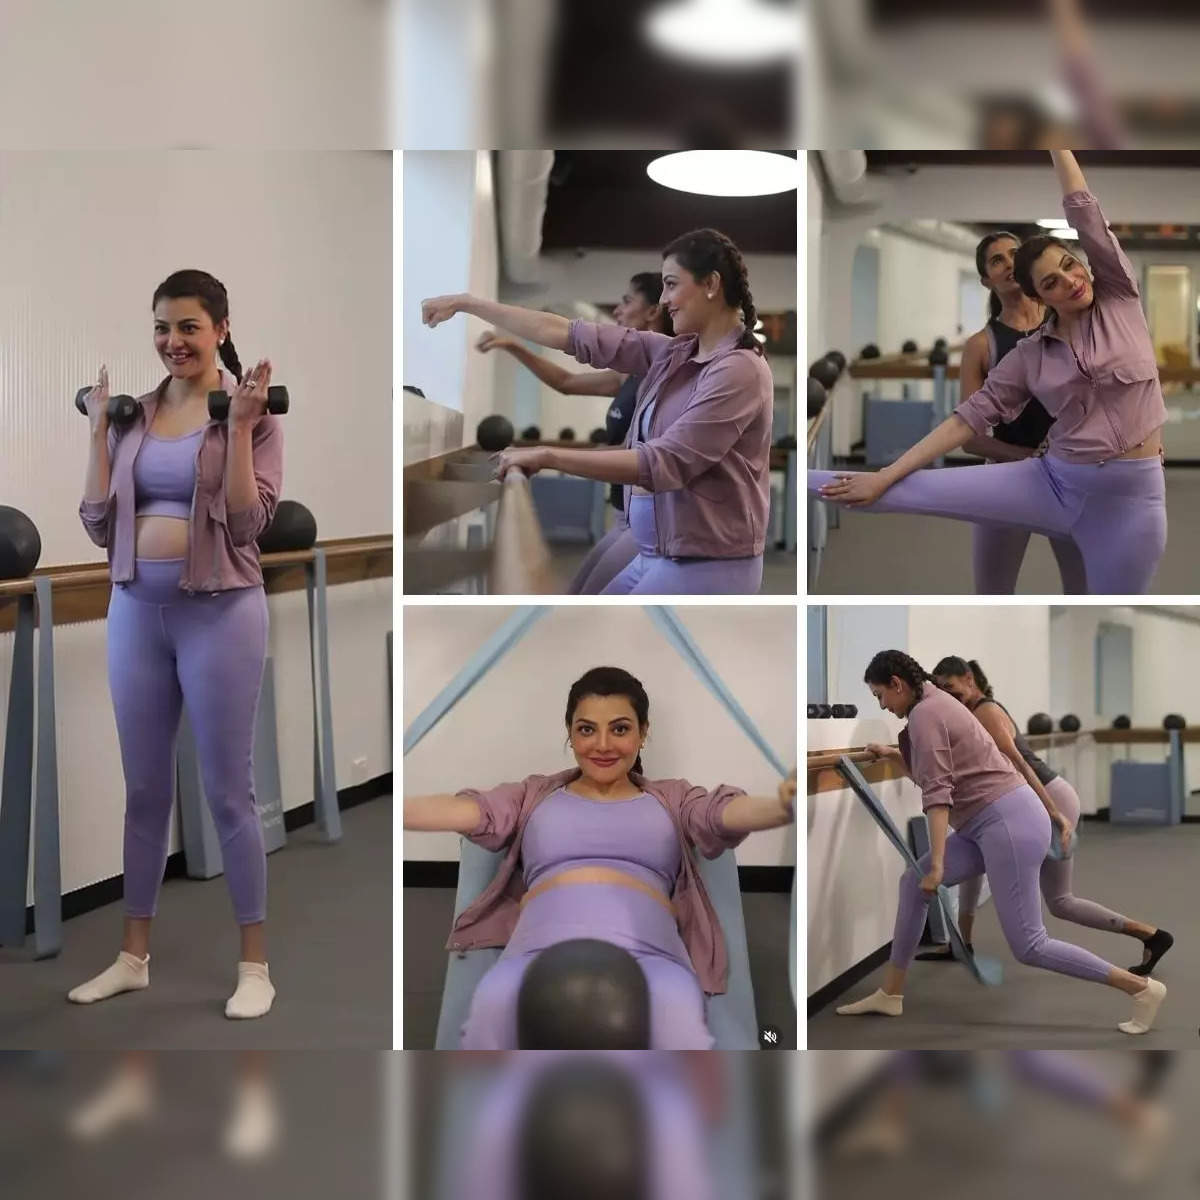 Kajal 8 Sex - Kajal Aggarwal practises aerobic conditioning during pregnancy, says it  helps her feel stronger & leaner - The Economic Times